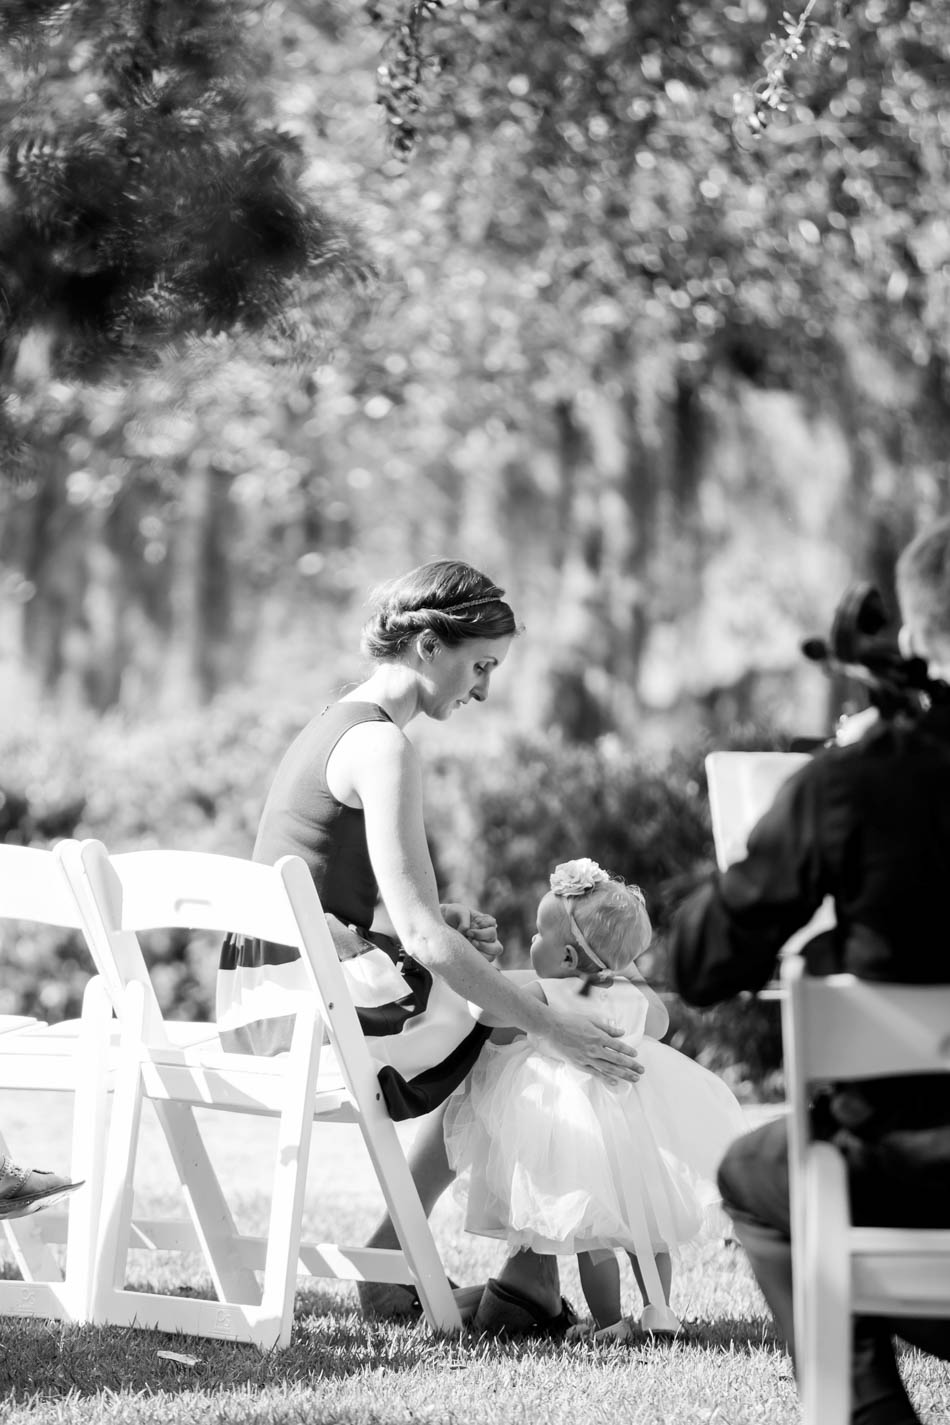 Guests arrive at ceremony, I'on Creek Club, Mt Pleasant, South Carolina. Kate Timbers Photography. http://katetimbers.com